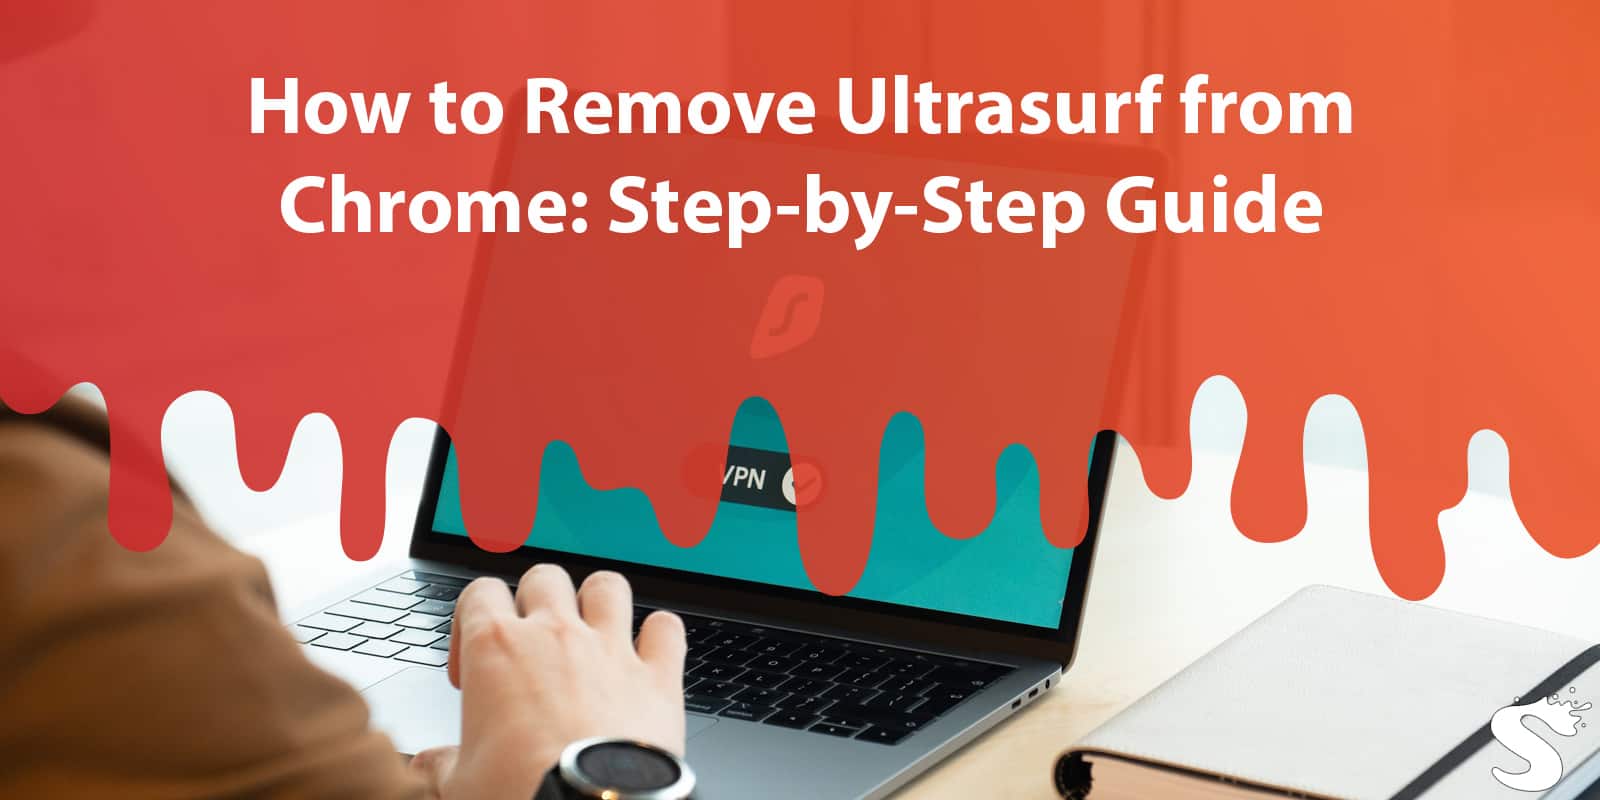 How to Remove Ultrasurf from Chrome: Step-by-Step Guide